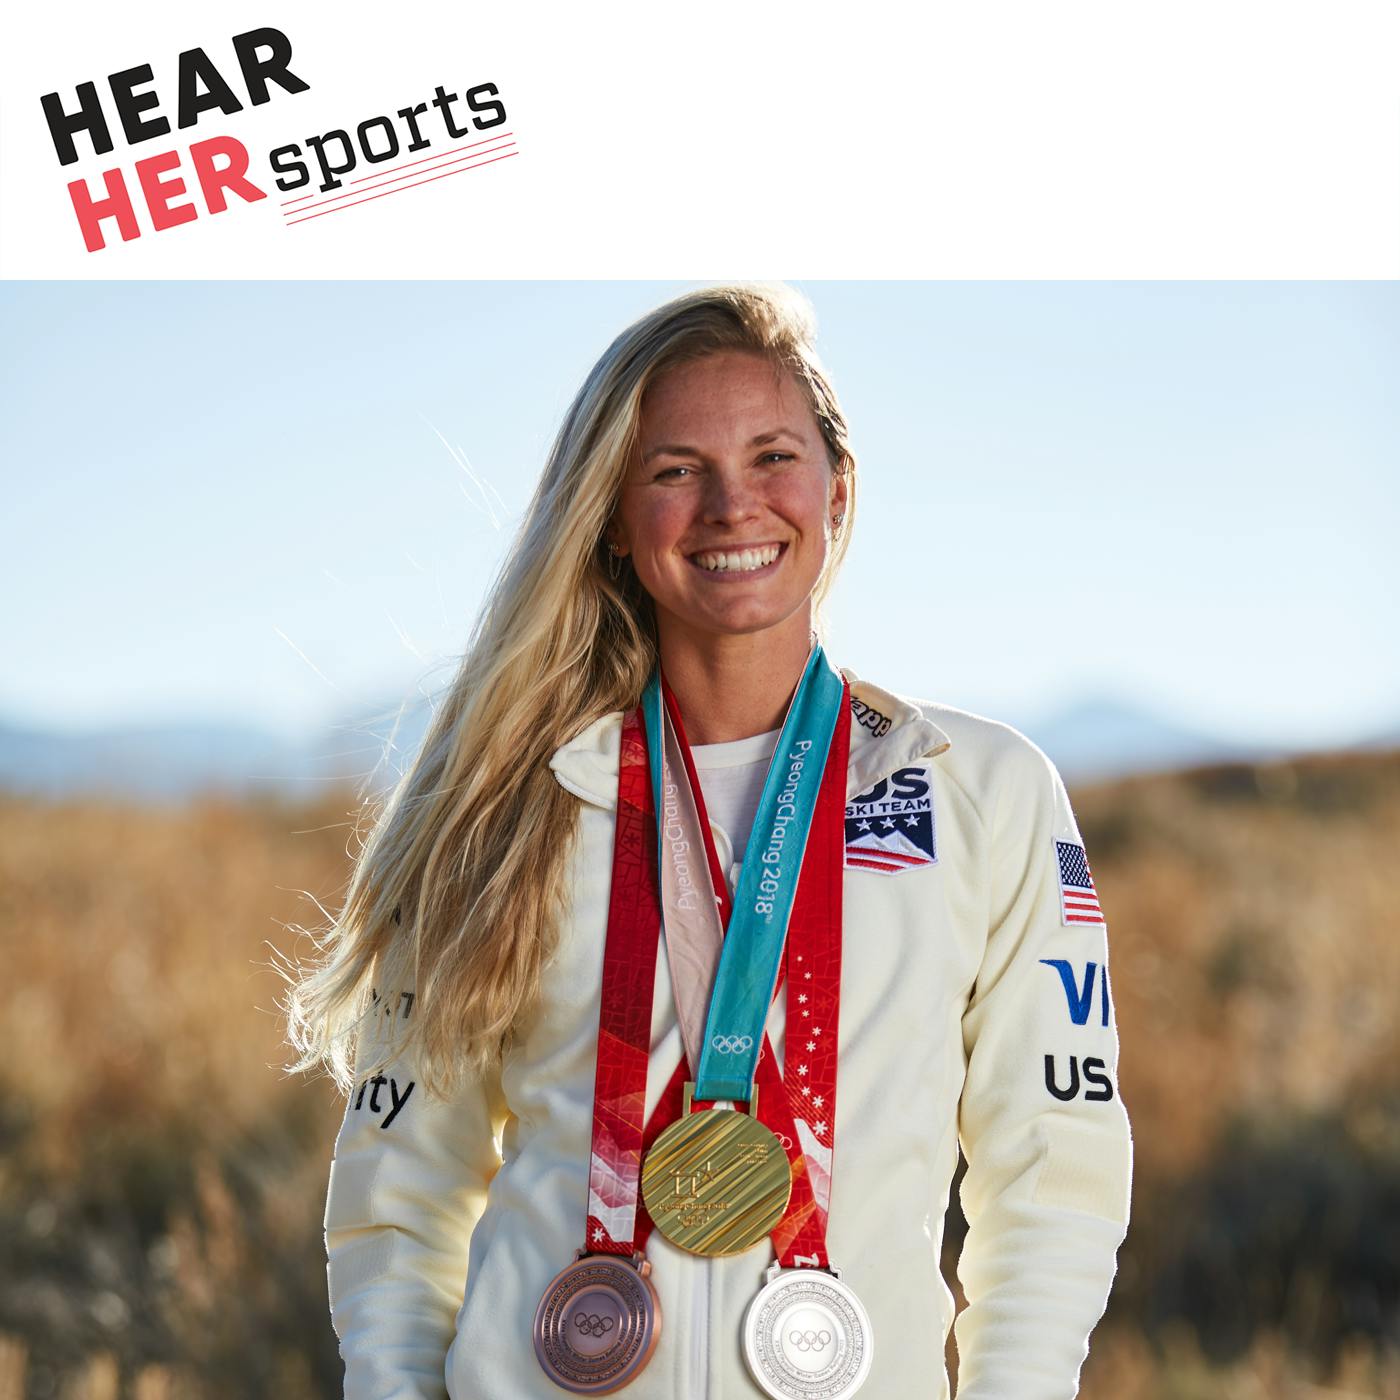 Jessie Diggins Sparkly Cross Country Ski Racer, Olympic Medalist, World Champion, Author…Ep157